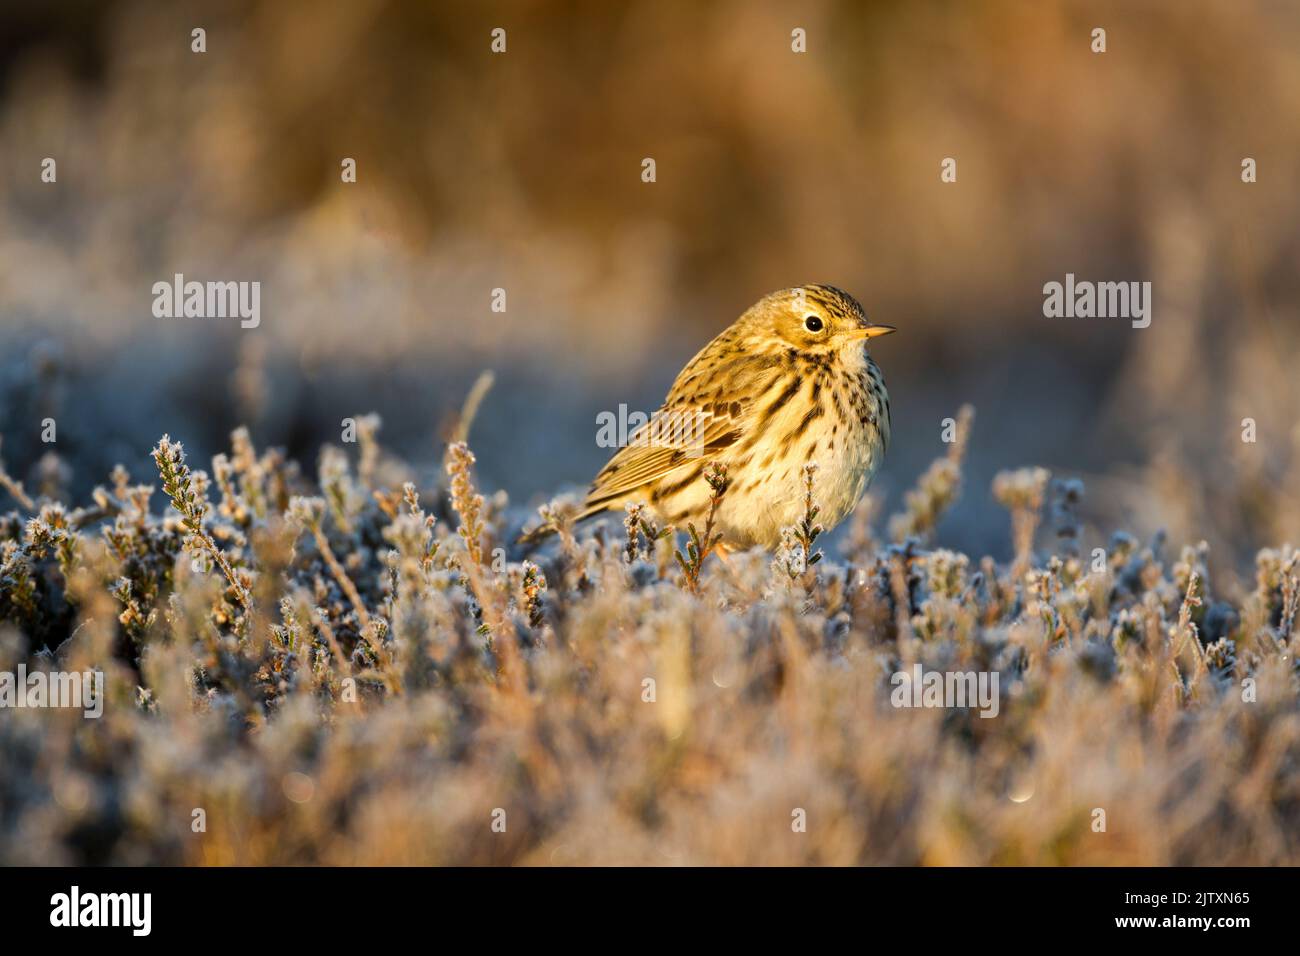 Meadow pipit, Latin name Anthus pratensis, perched on frost fringed heather in warm early morning light in the North York Moors national park Stock Photo